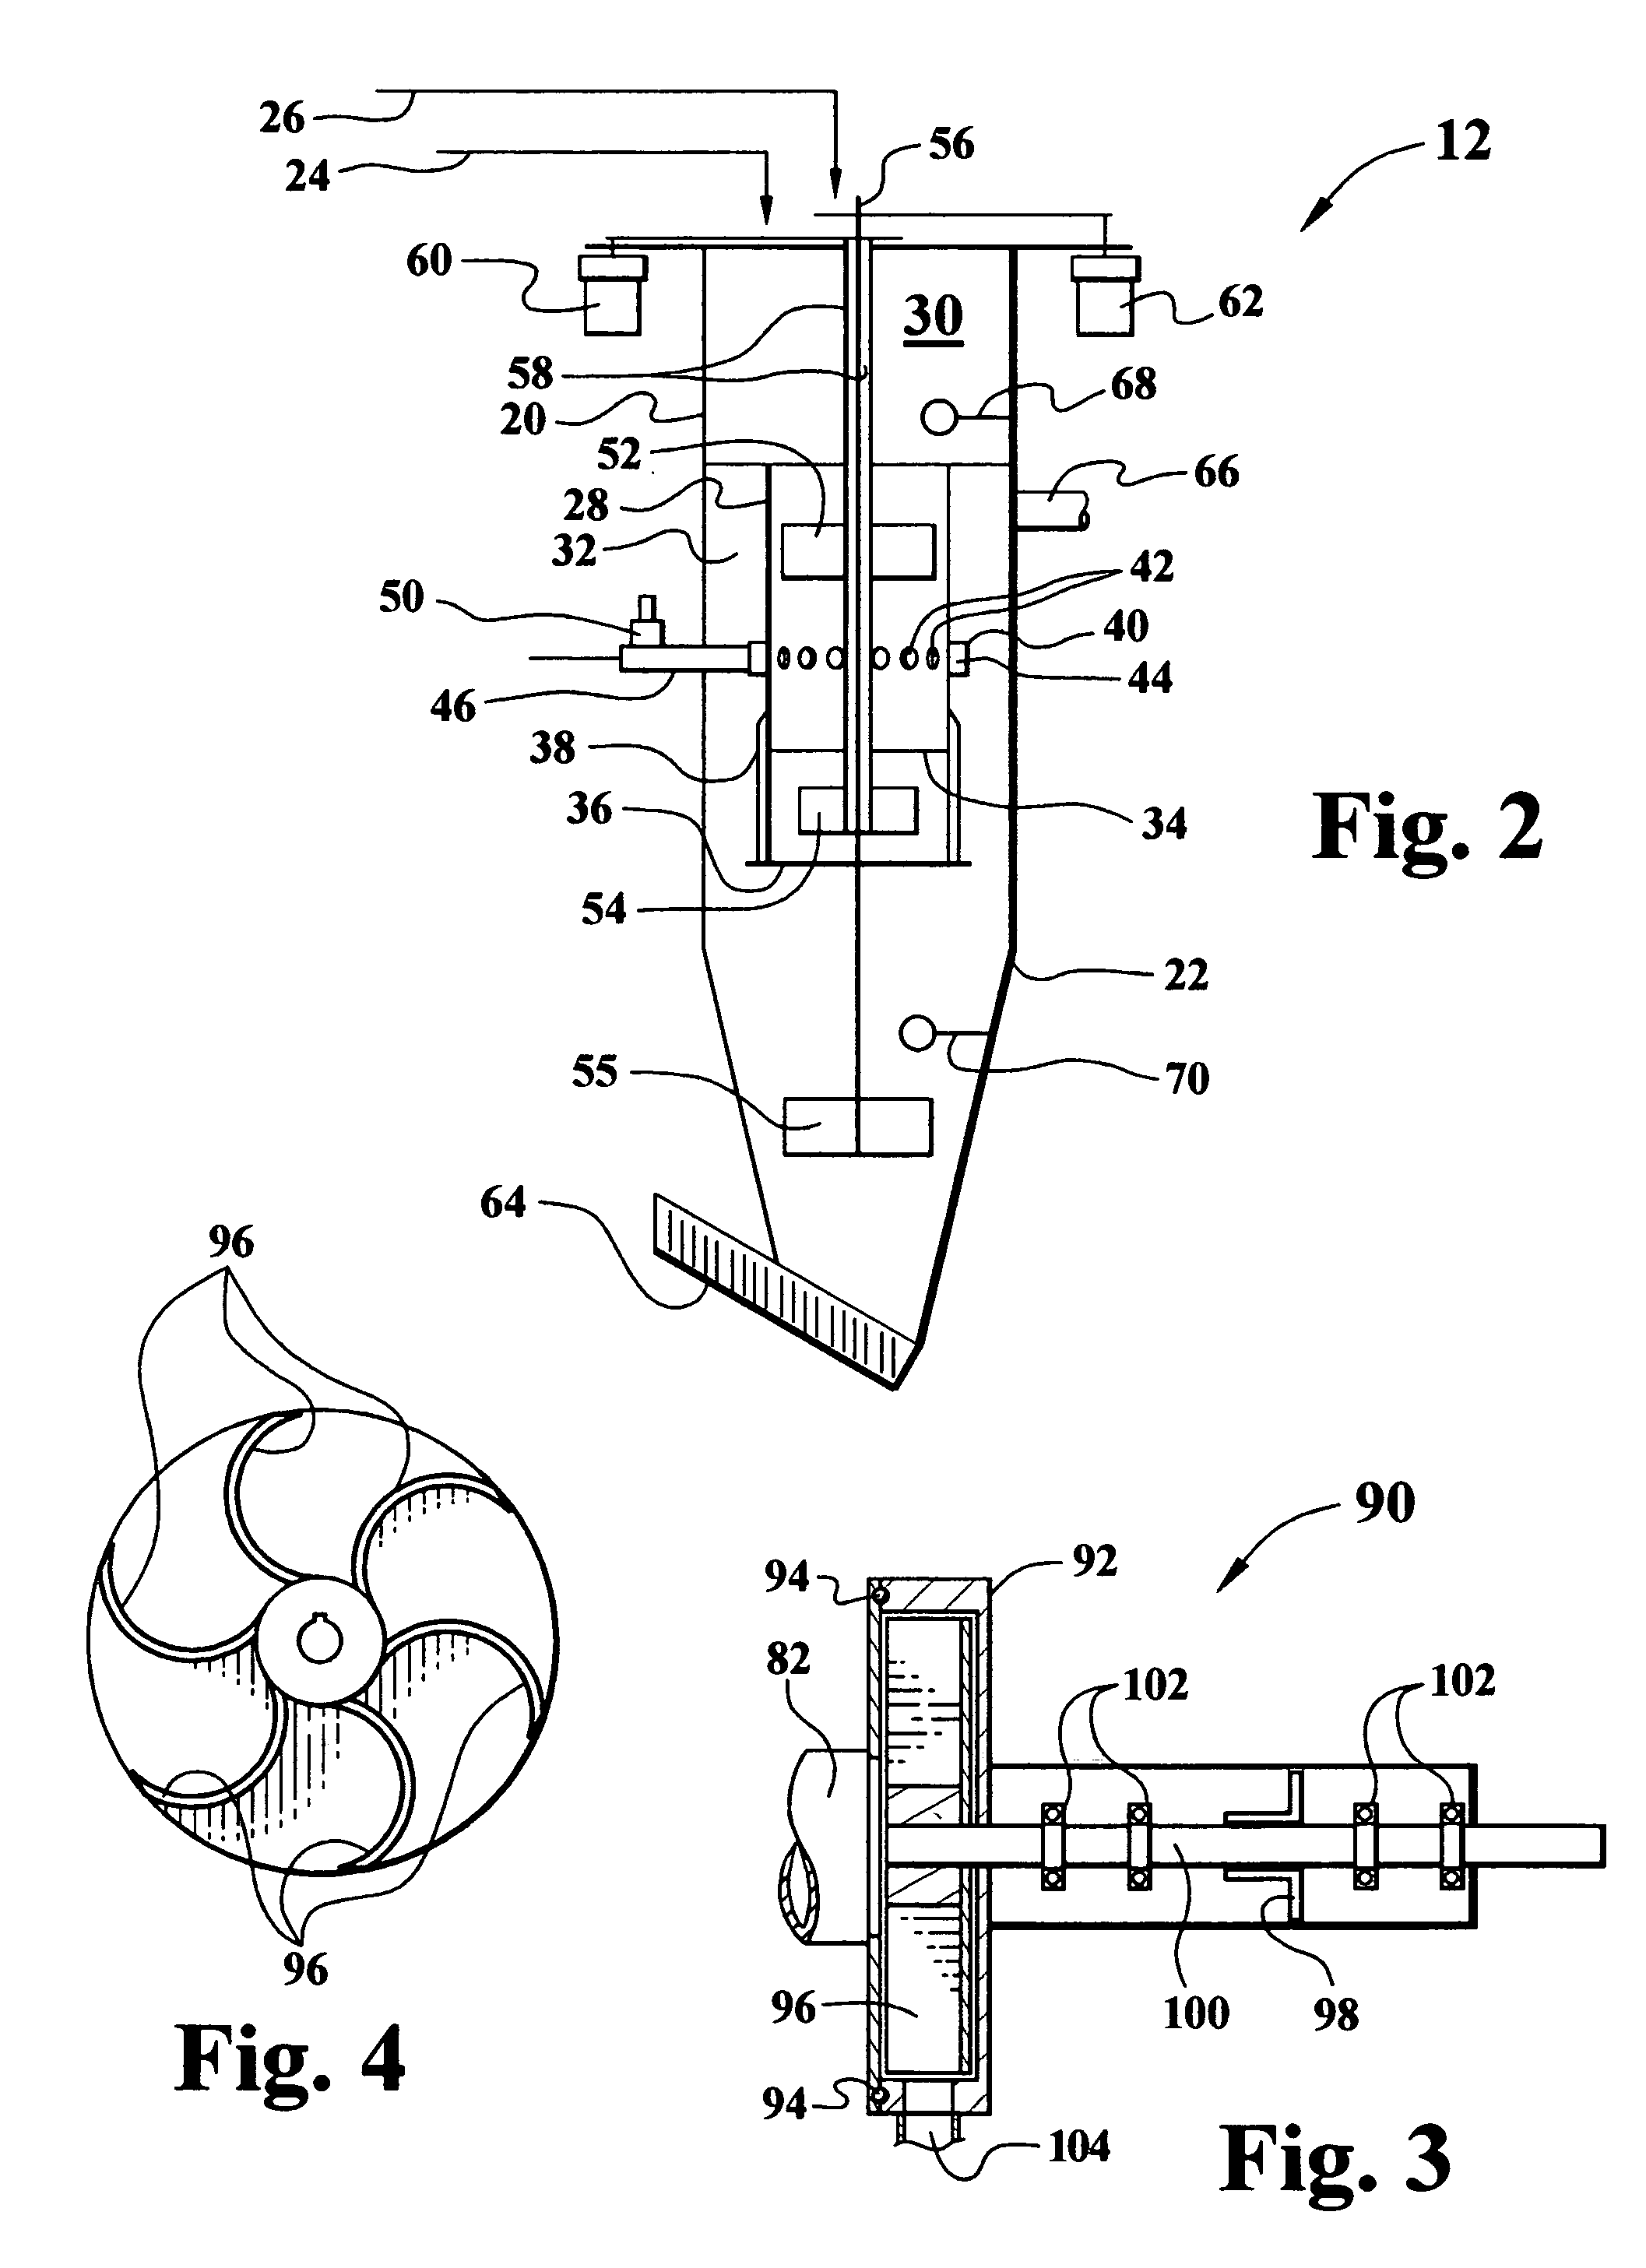 Gasification apparatus and method